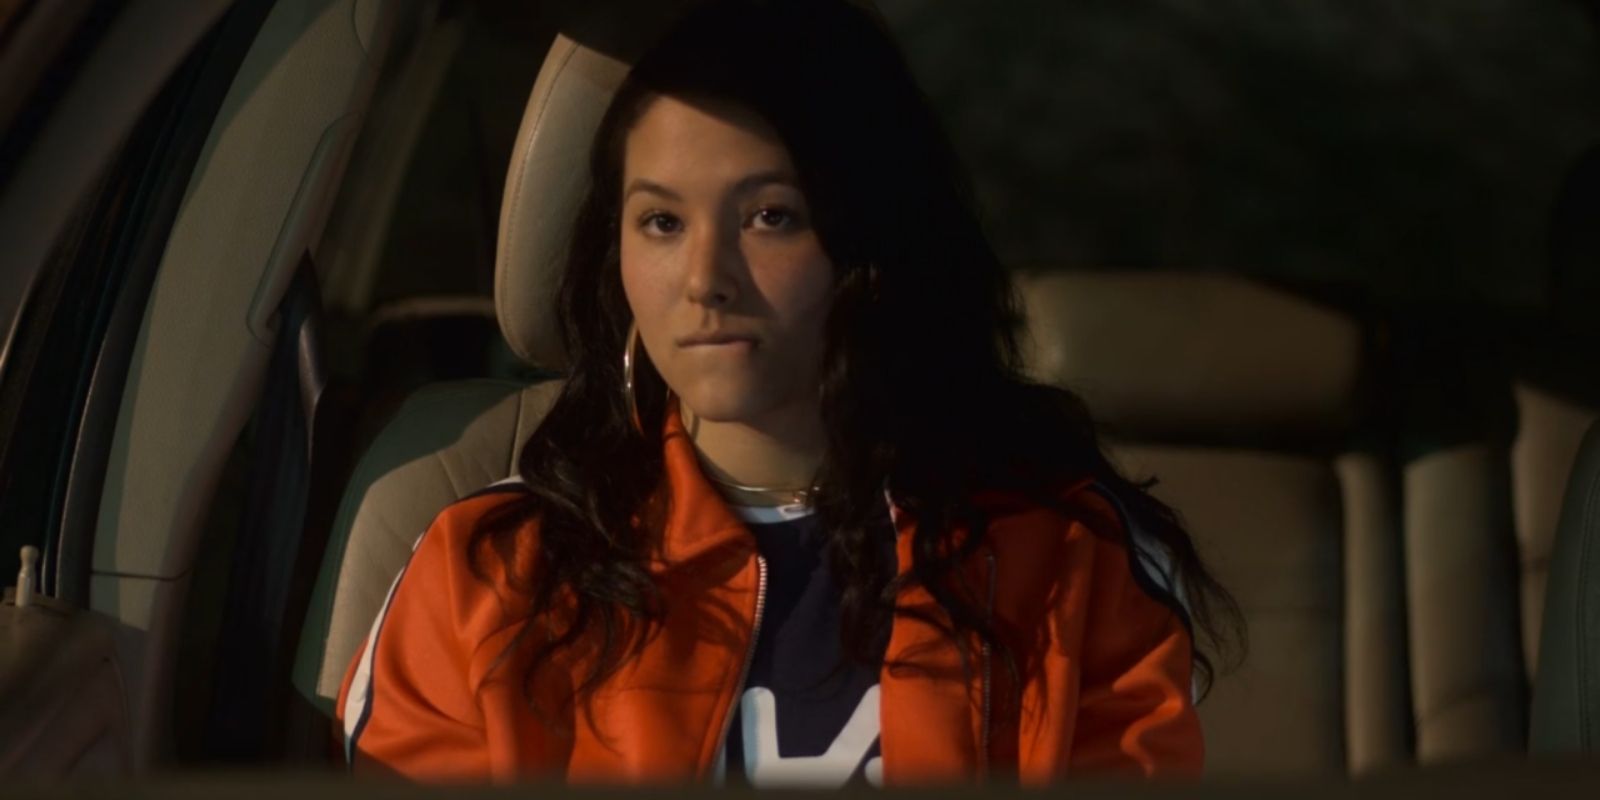 Izzie looks confused in the passenger seat of Casey's car in Atypical